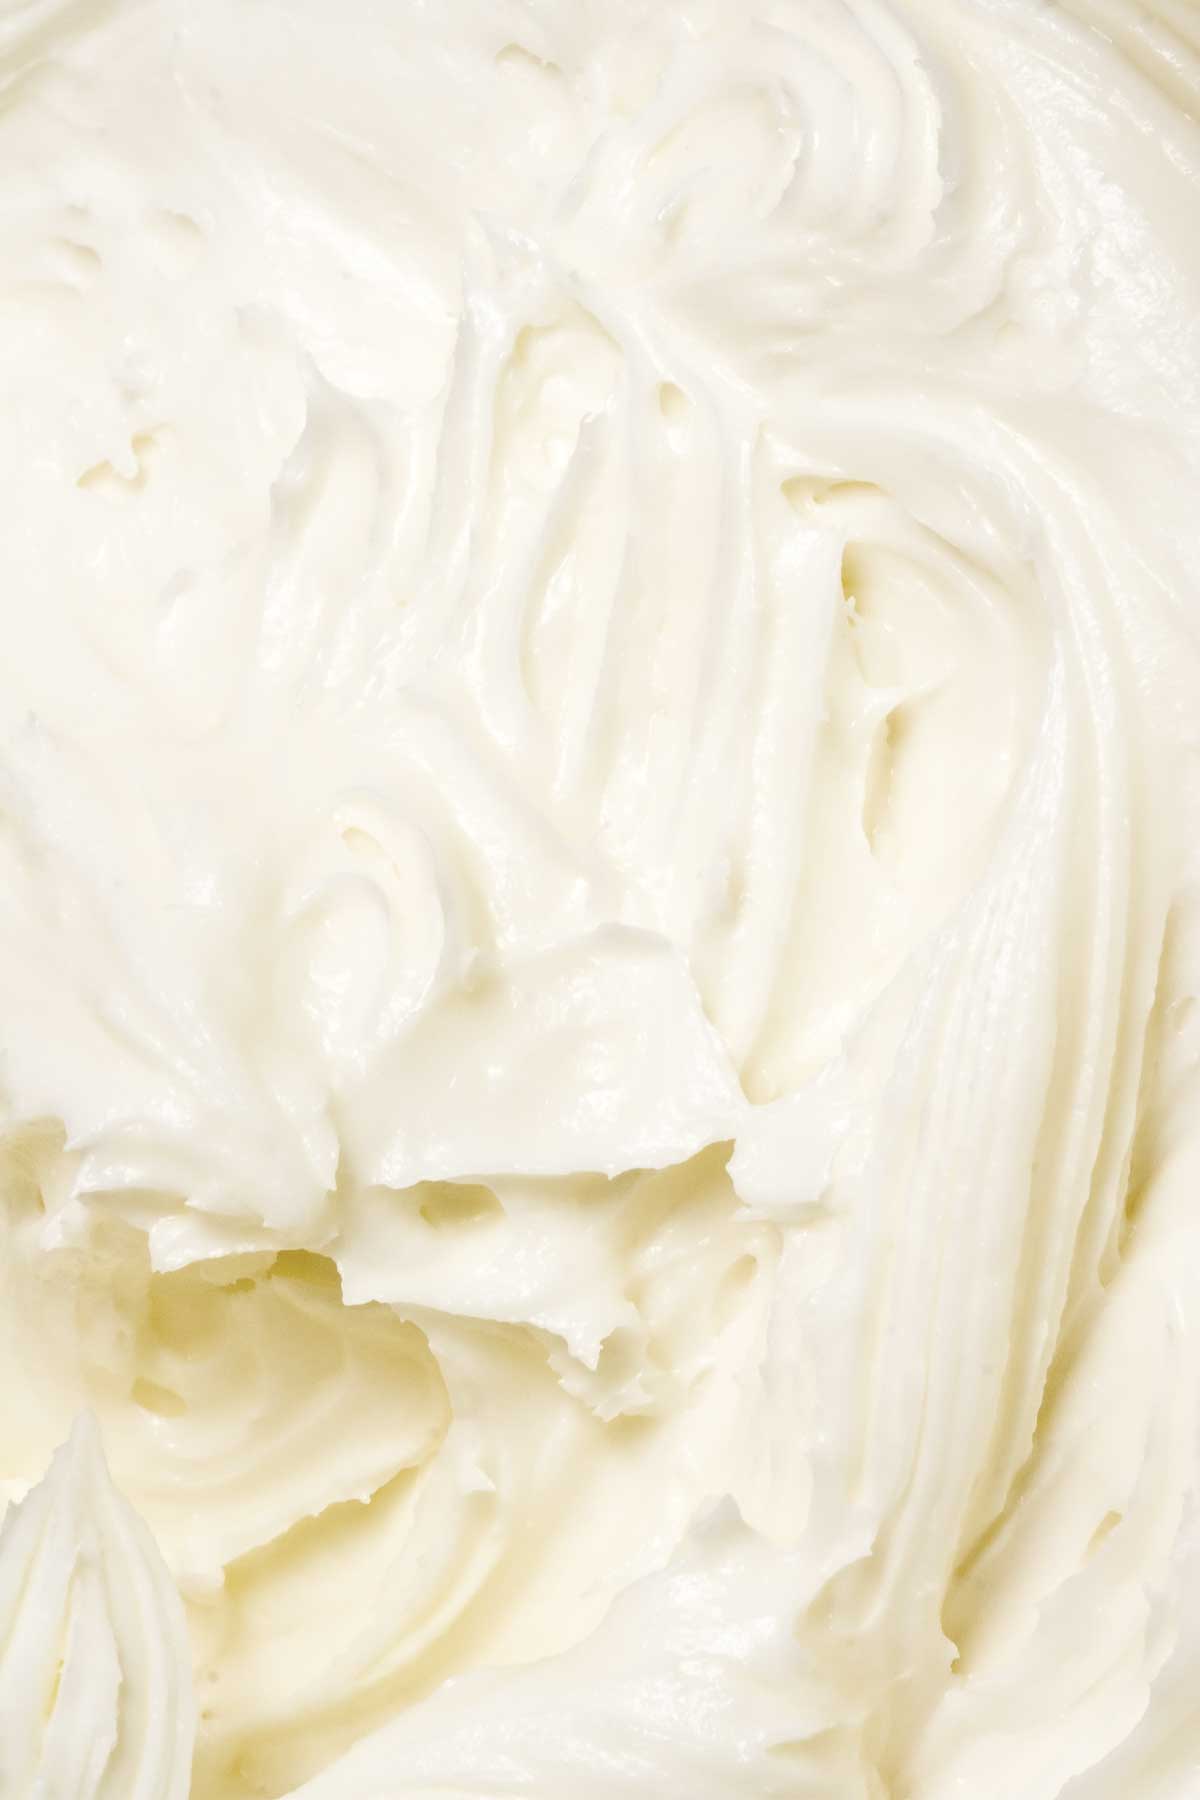 A close view of swirled cream cheese frosting.